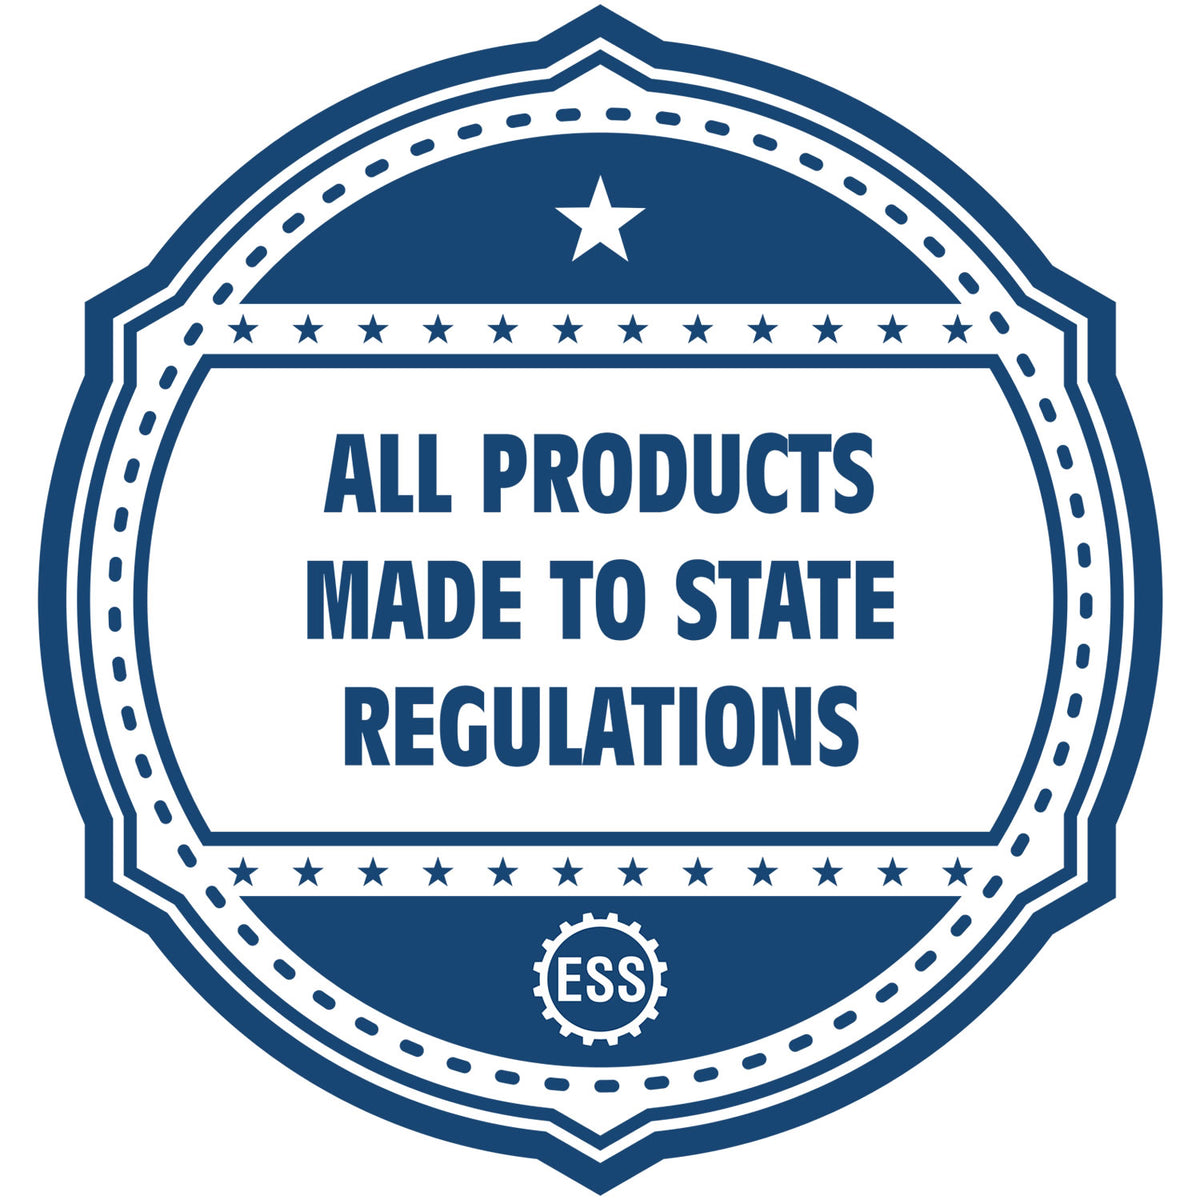 An icon or badge element for the MaxLight Premium Pre-Inked New Jersey State Seal Notarial Stamp showing that this product is made in compliance with state regulations.